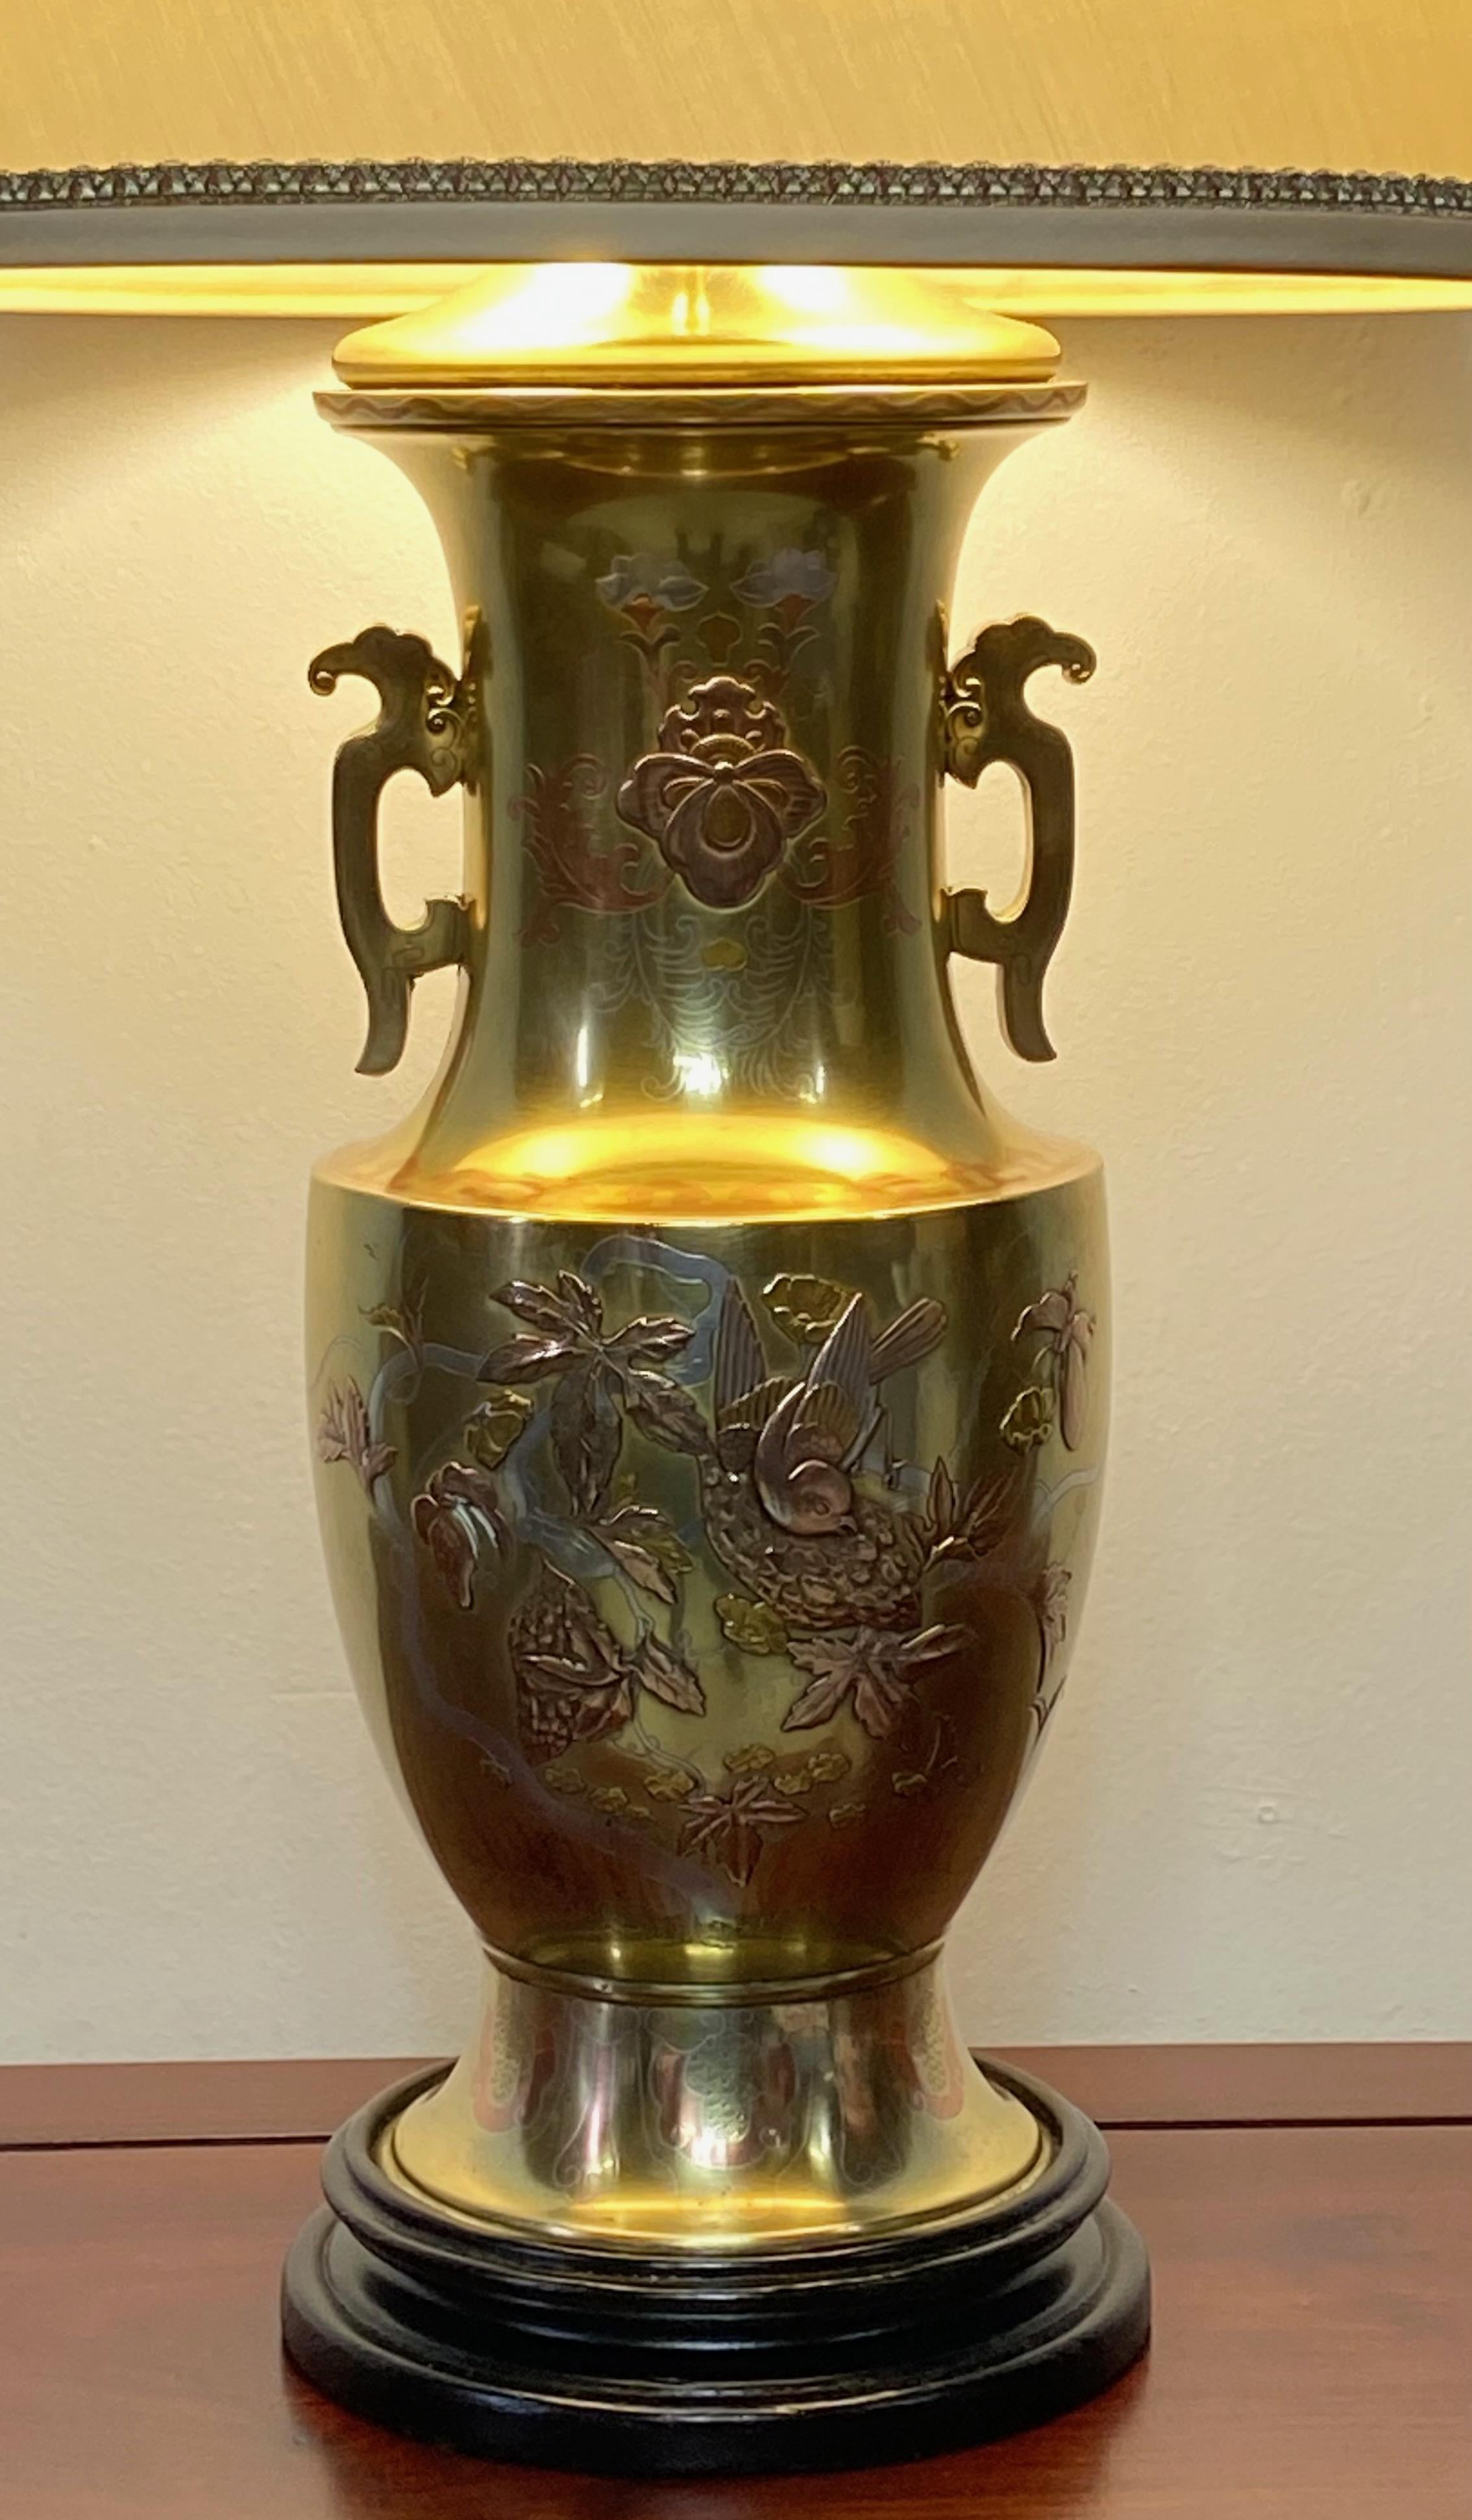 A solid yellow bronze with inlaid red bronze and silver vase converted to a lamp. The body of the vase would have originally had a dark green patina with red bronze and silver highlights. The patina was removed and the vase polished and protected